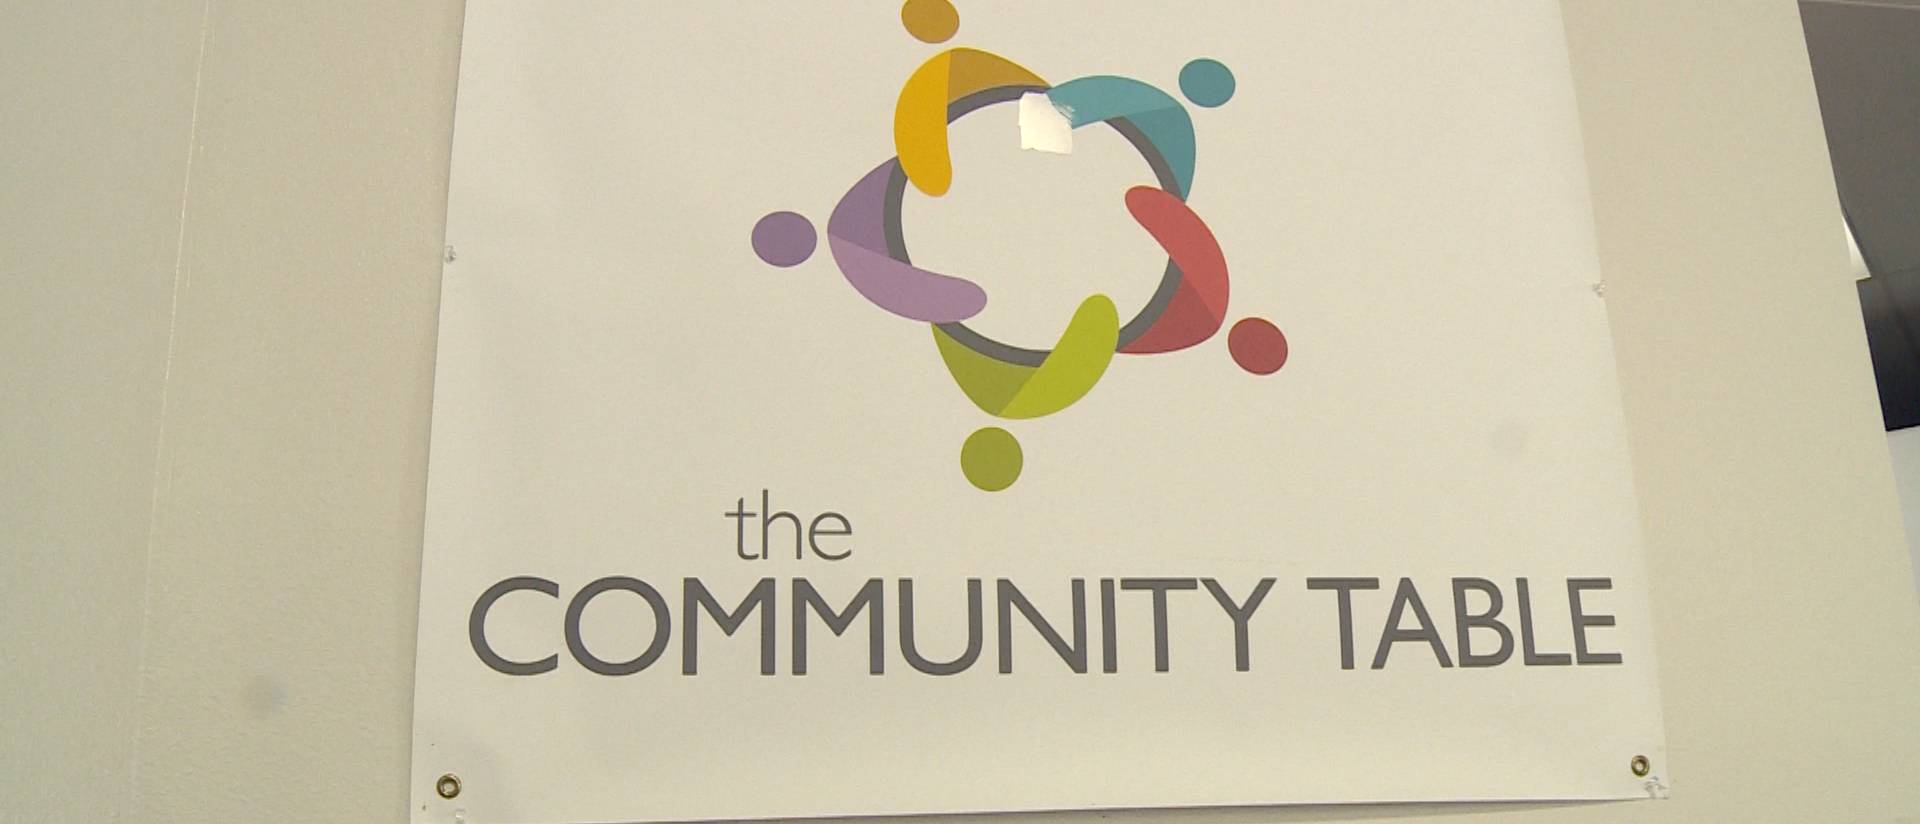 A poster for The Community Table hangs on a wall.